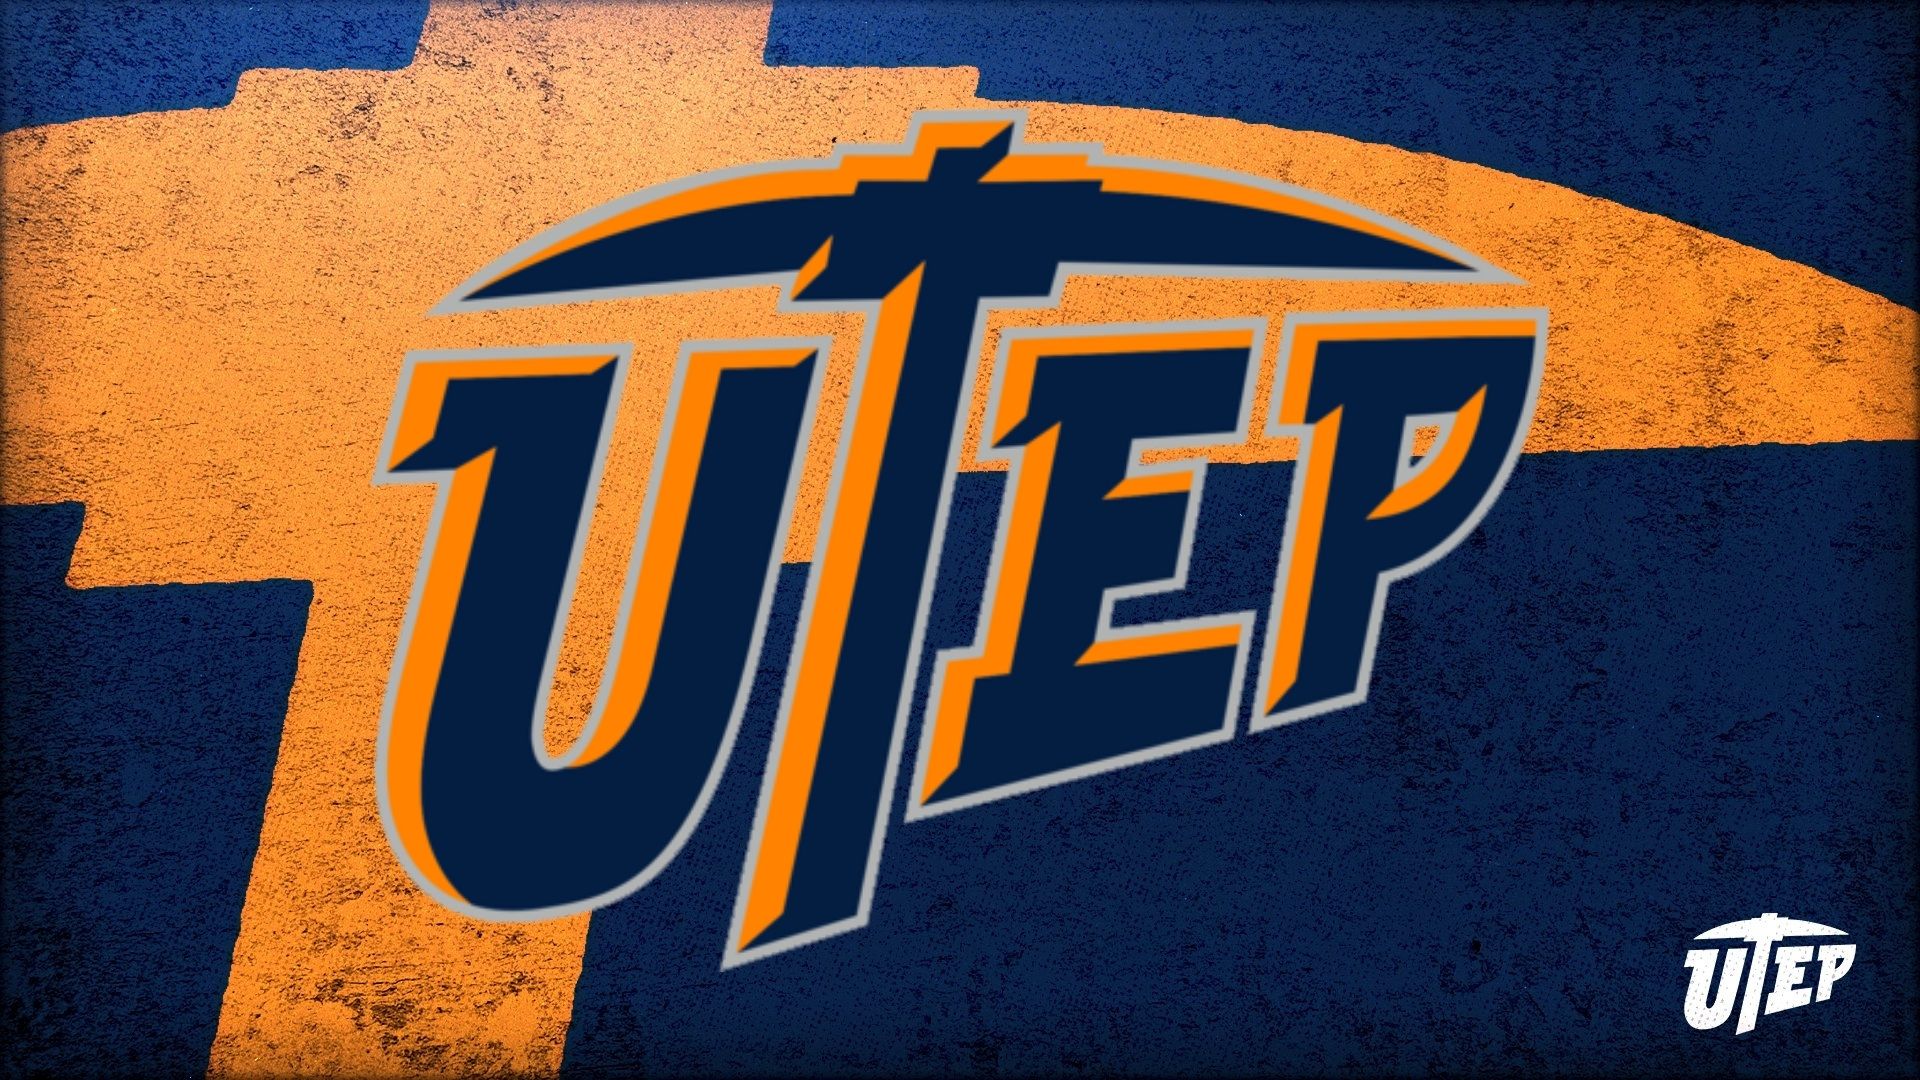 UTEP gets US$1.25 million grant to promote modeling and simulation scientists and engineers